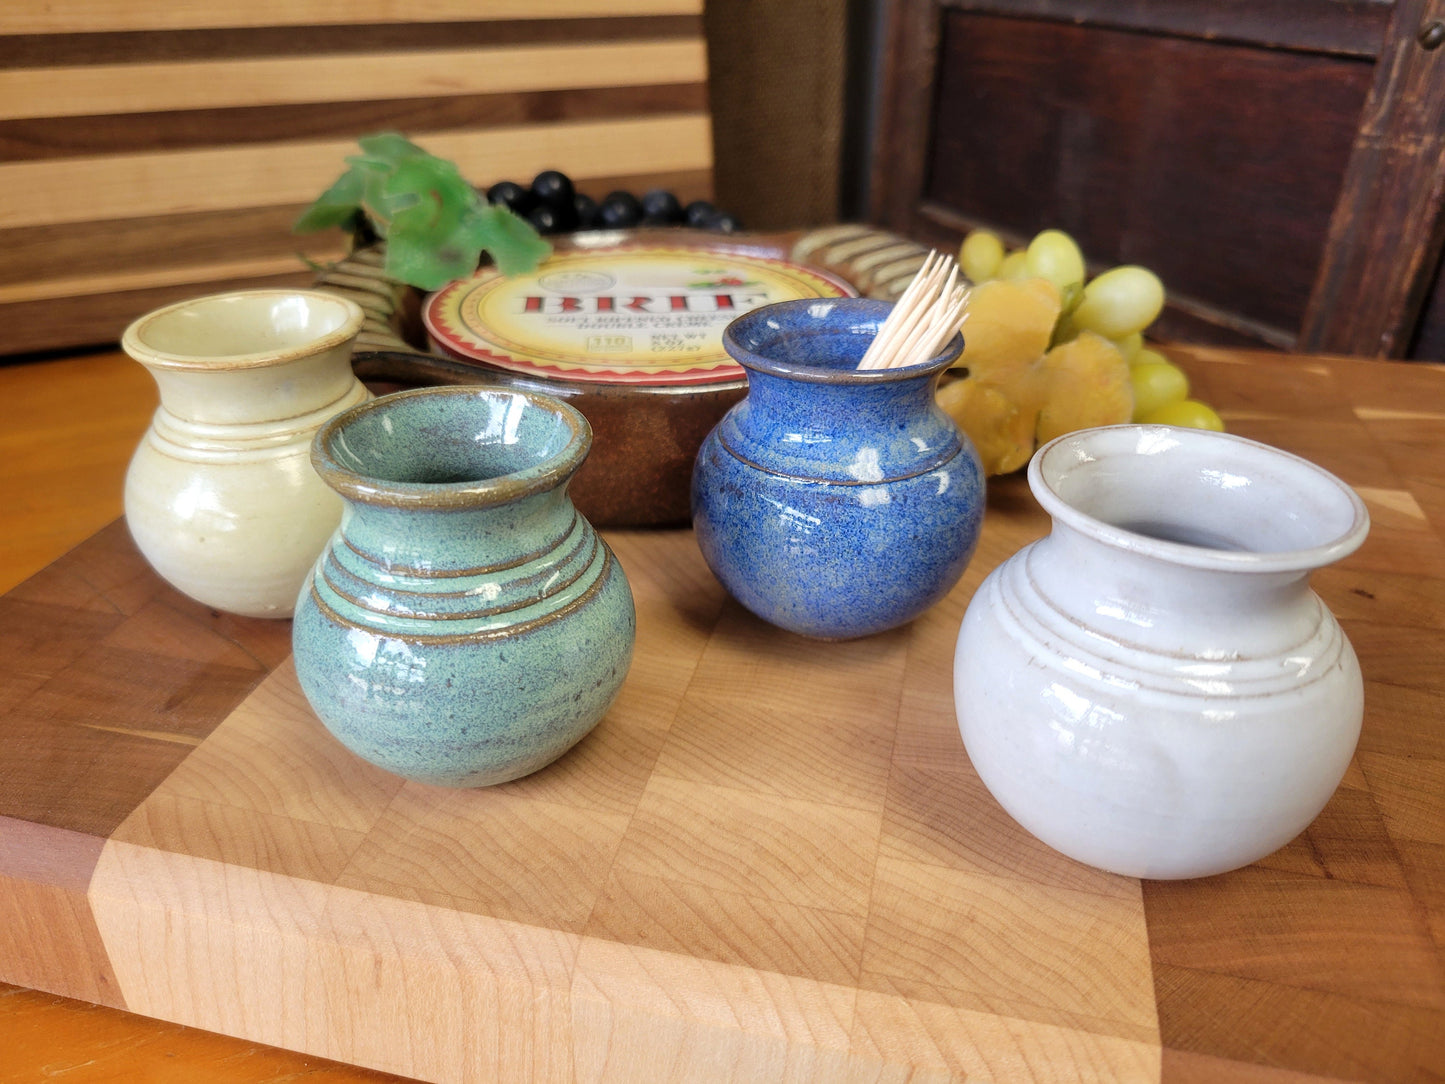 Miniature Pottery Pick Dispenser Cup - Charcuterie Board Accessories for Display - Toothpick Holder for Appetizers - Farmhouse Decor Blue